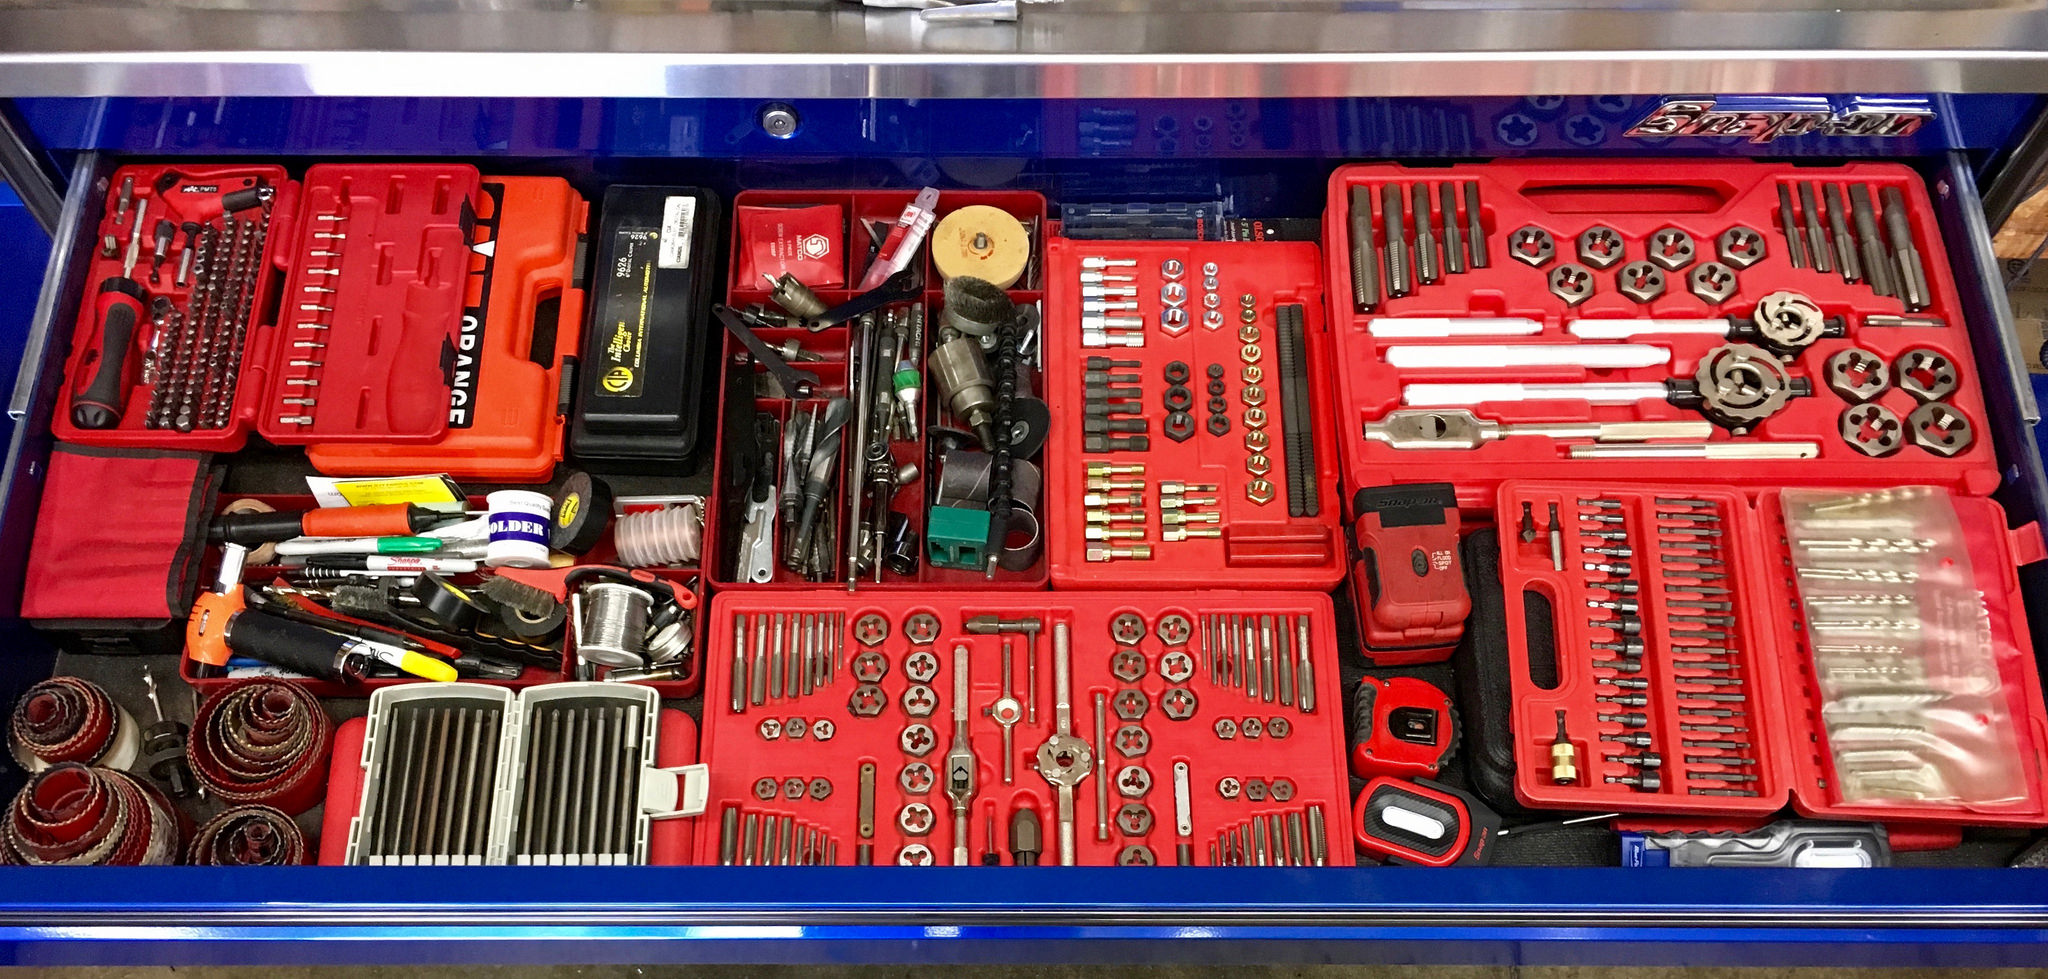 Let's See Your Tool Collection | REEF2REEF Saltwater and Reef ...